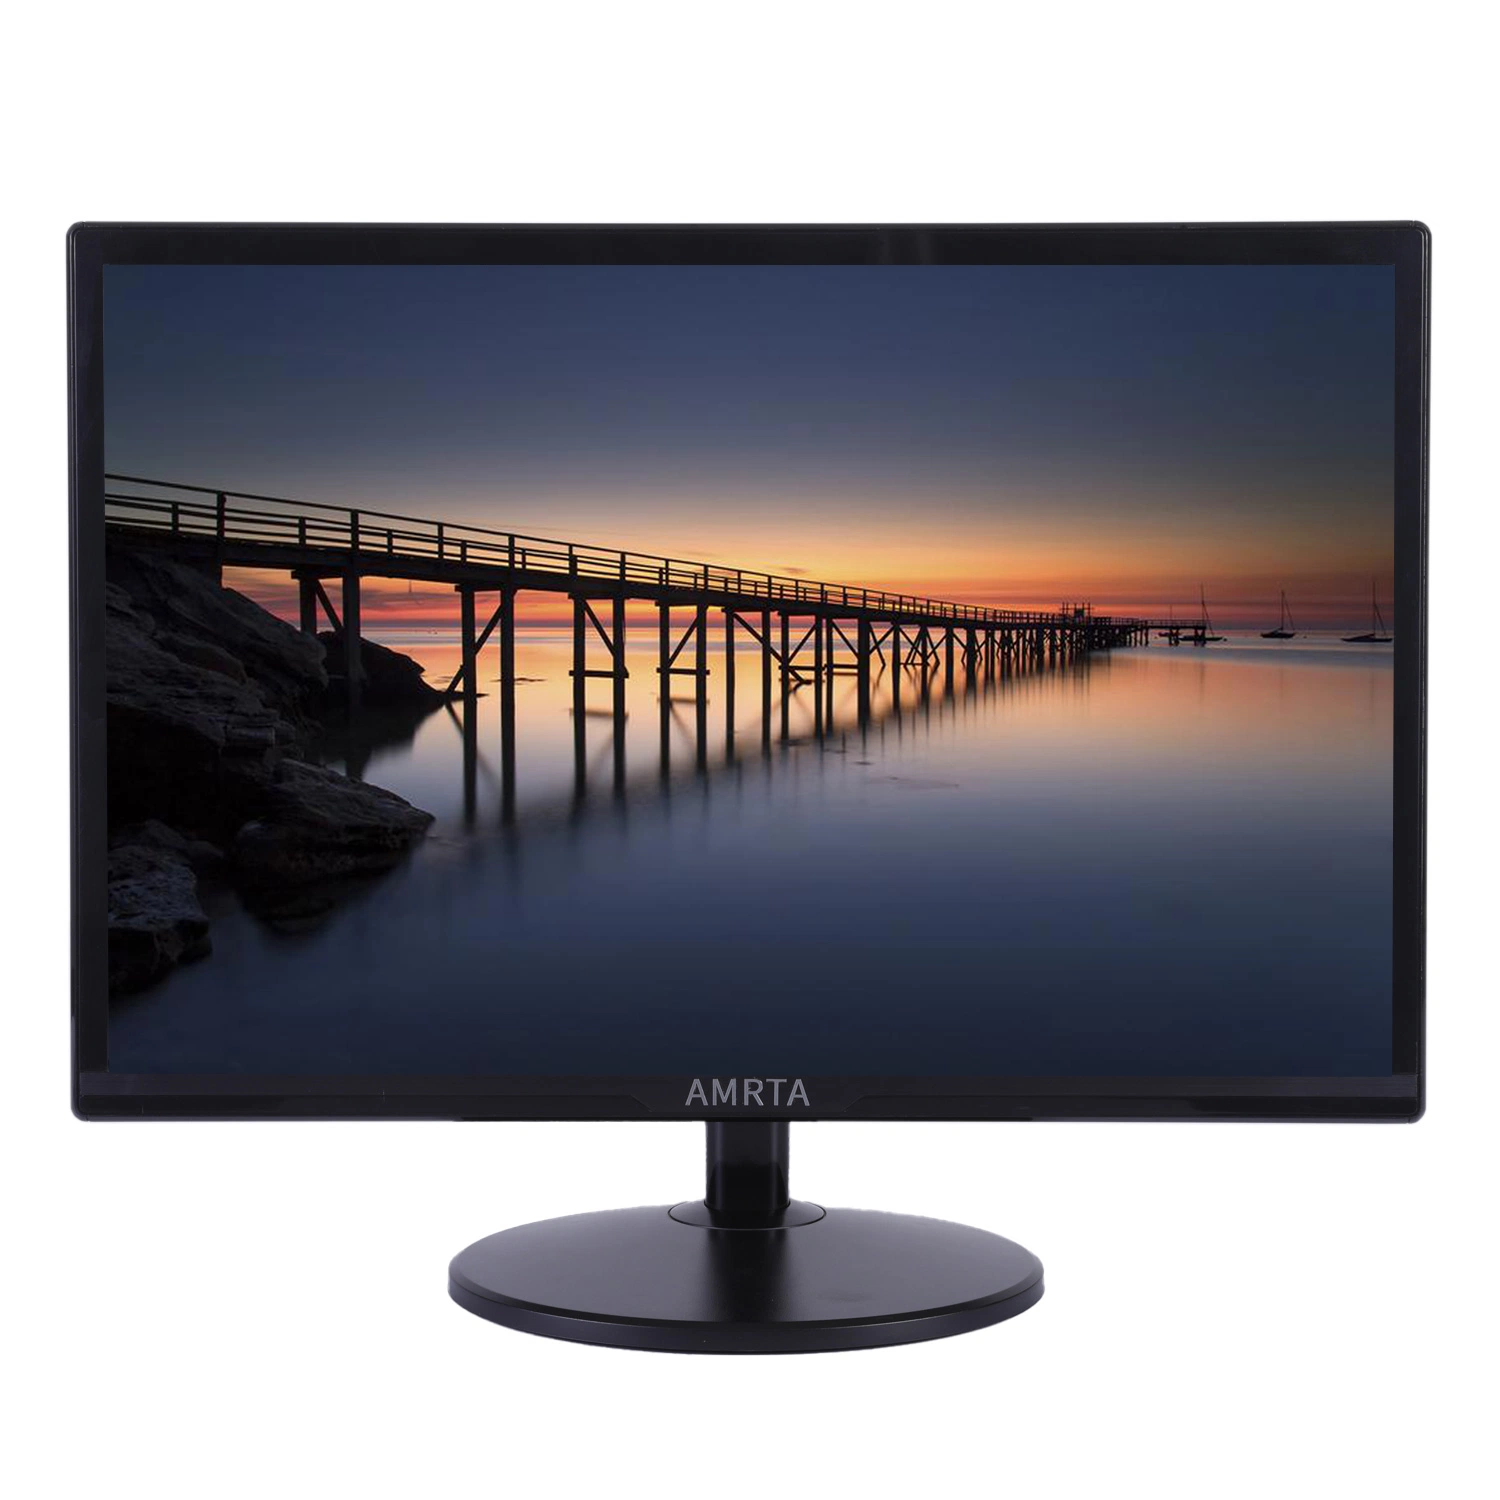 Hot Sale Office School Use 18.5 Inch Desktop Computer Monitor LED Display